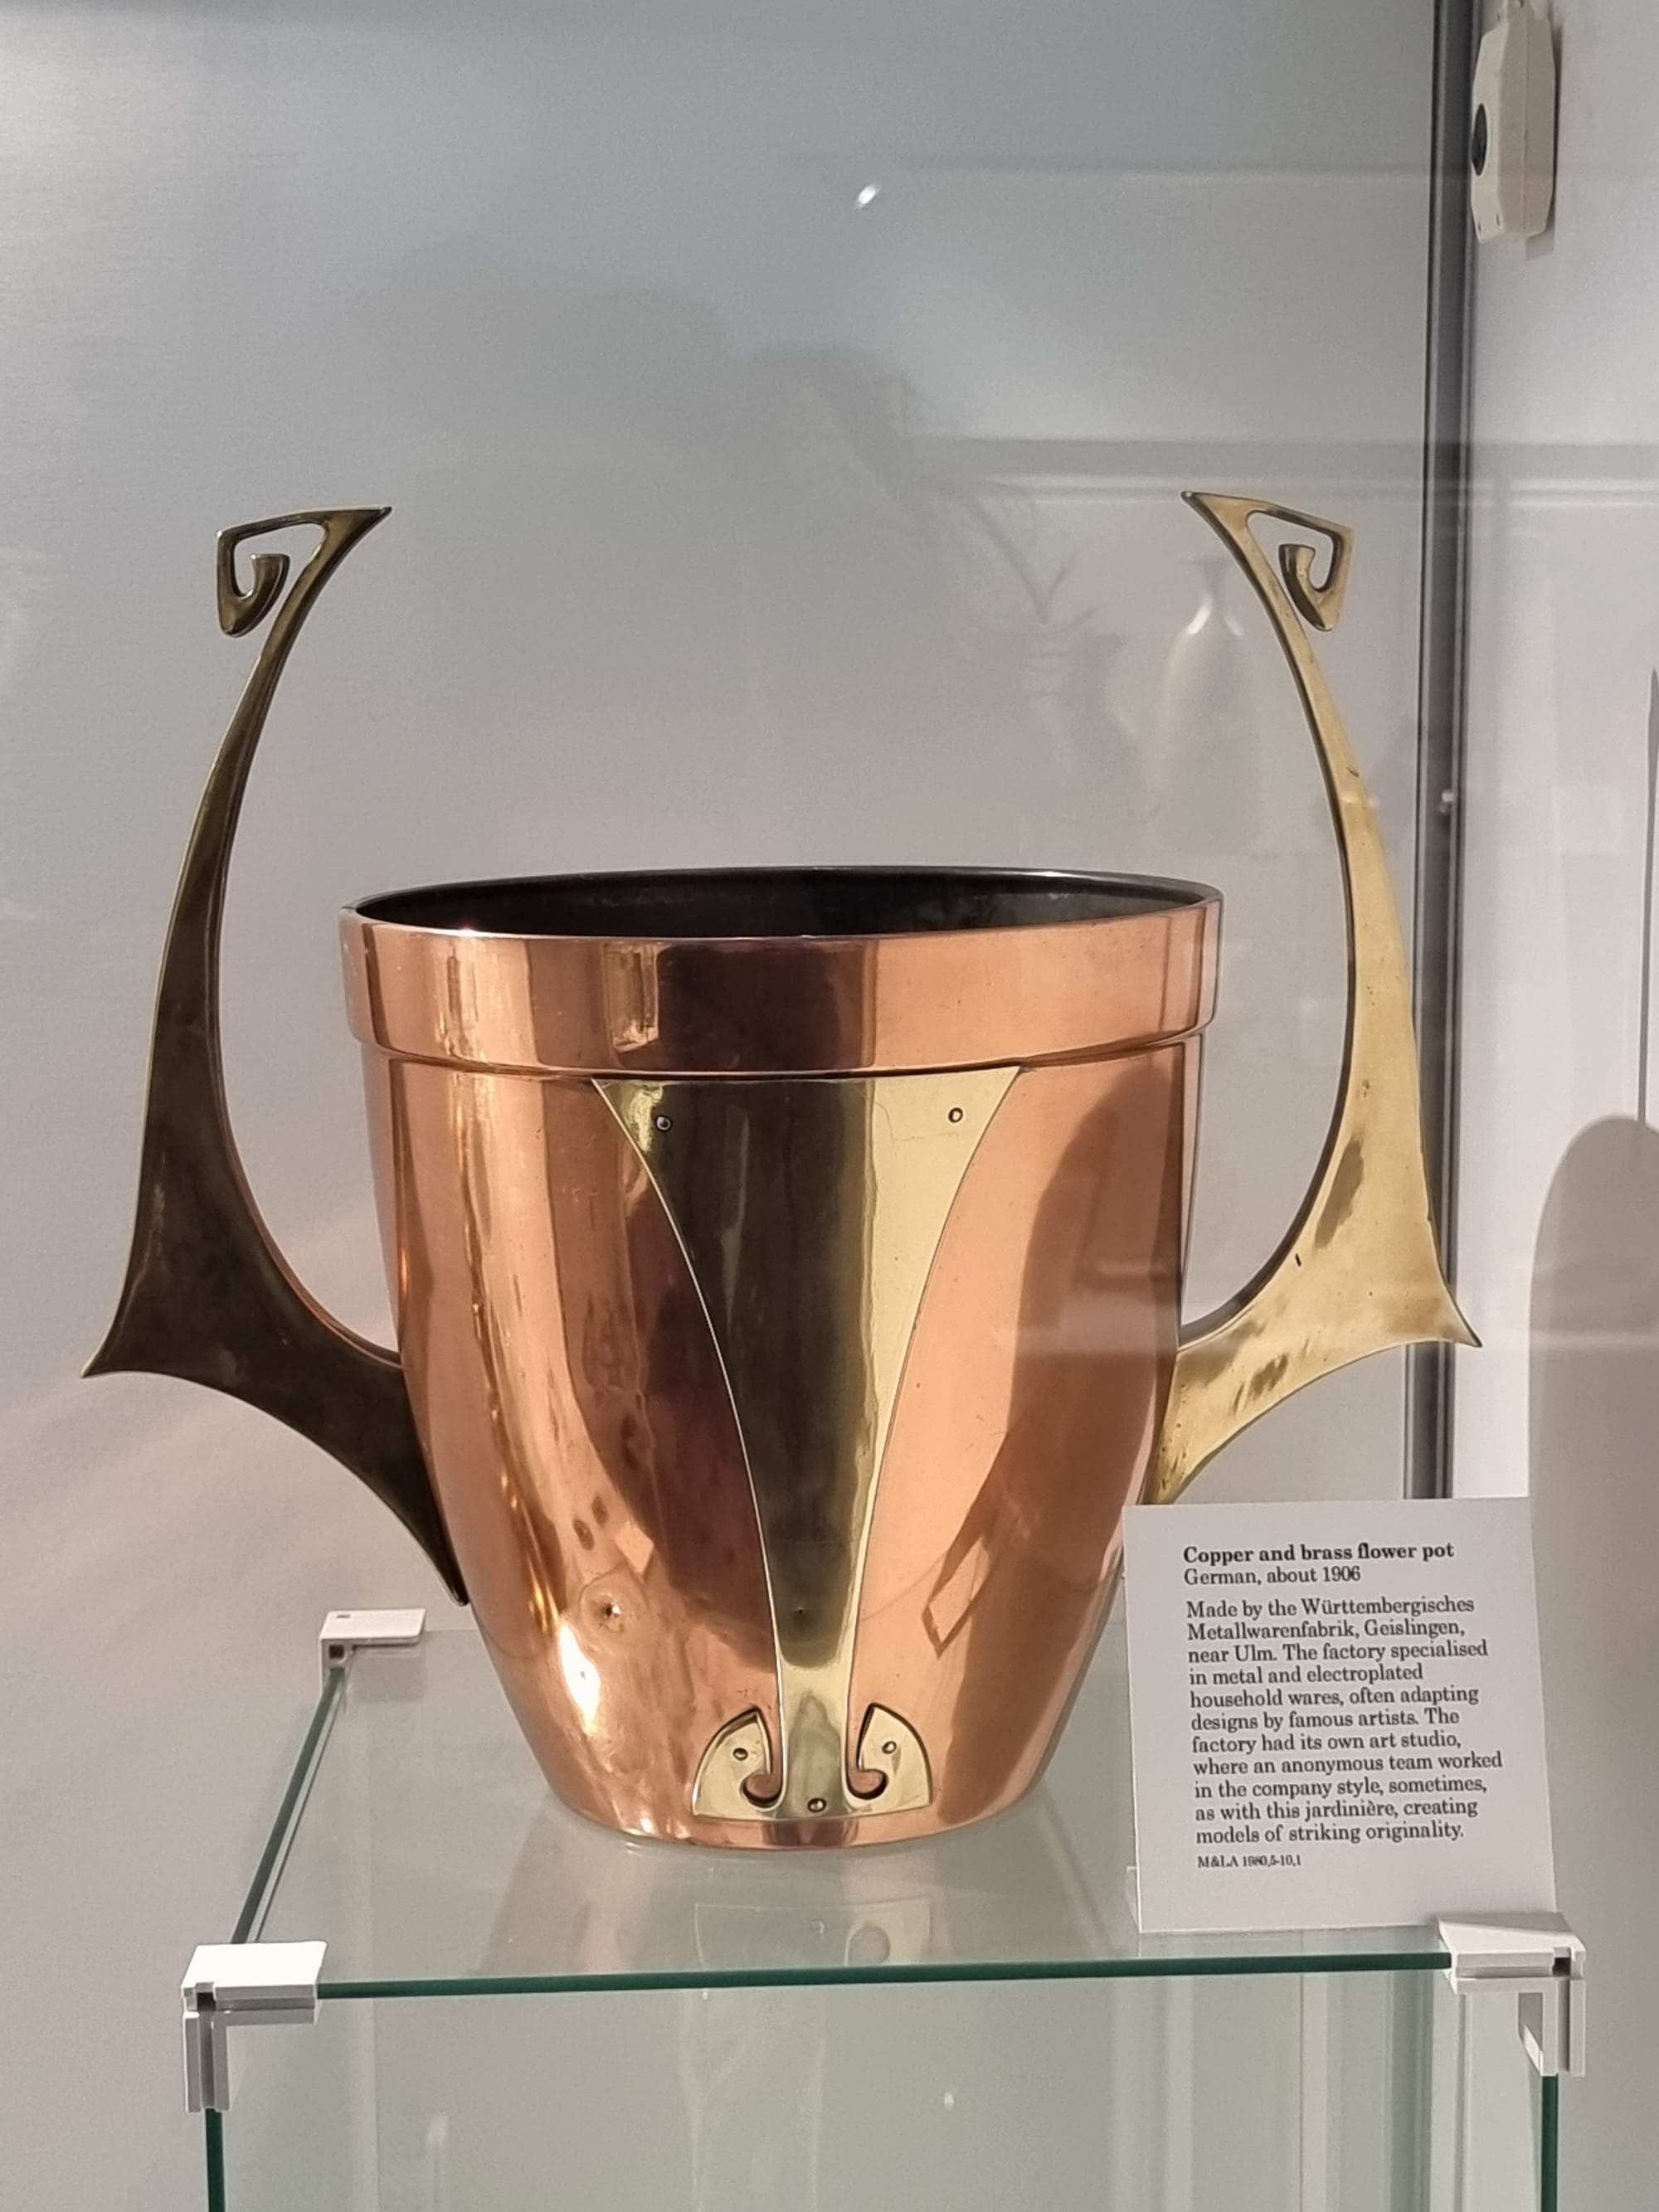 A copper and brass flower pot from the early 20th century, which is reminiscent of an upturned Mandalorian helmet